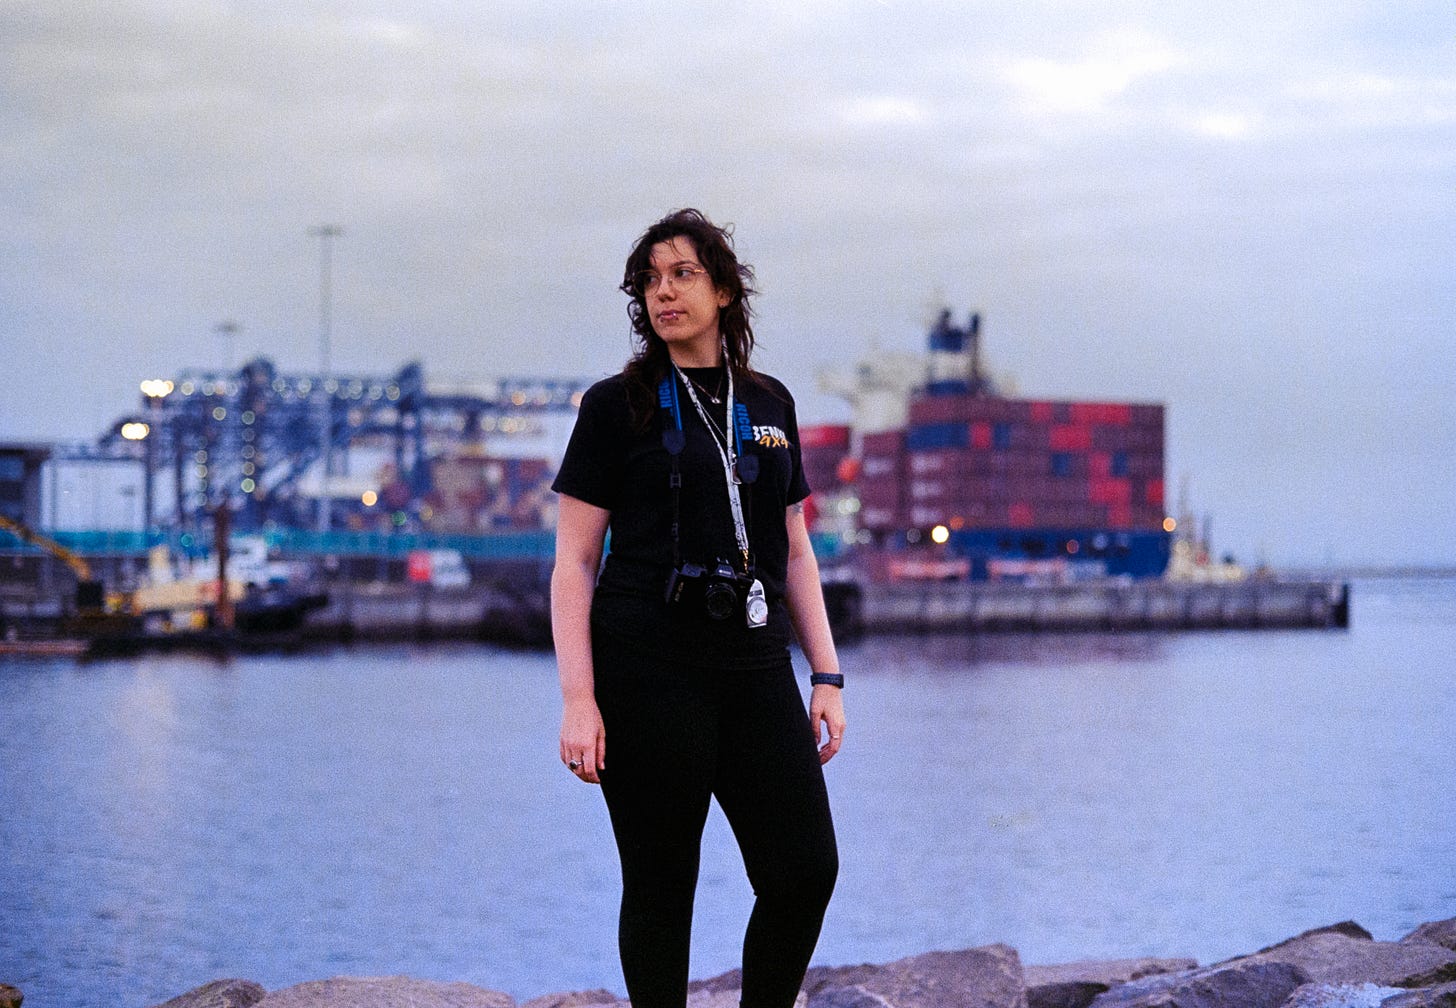 Josie with her camera, standing at the shoreline at Port Botany, looking over her shoulder